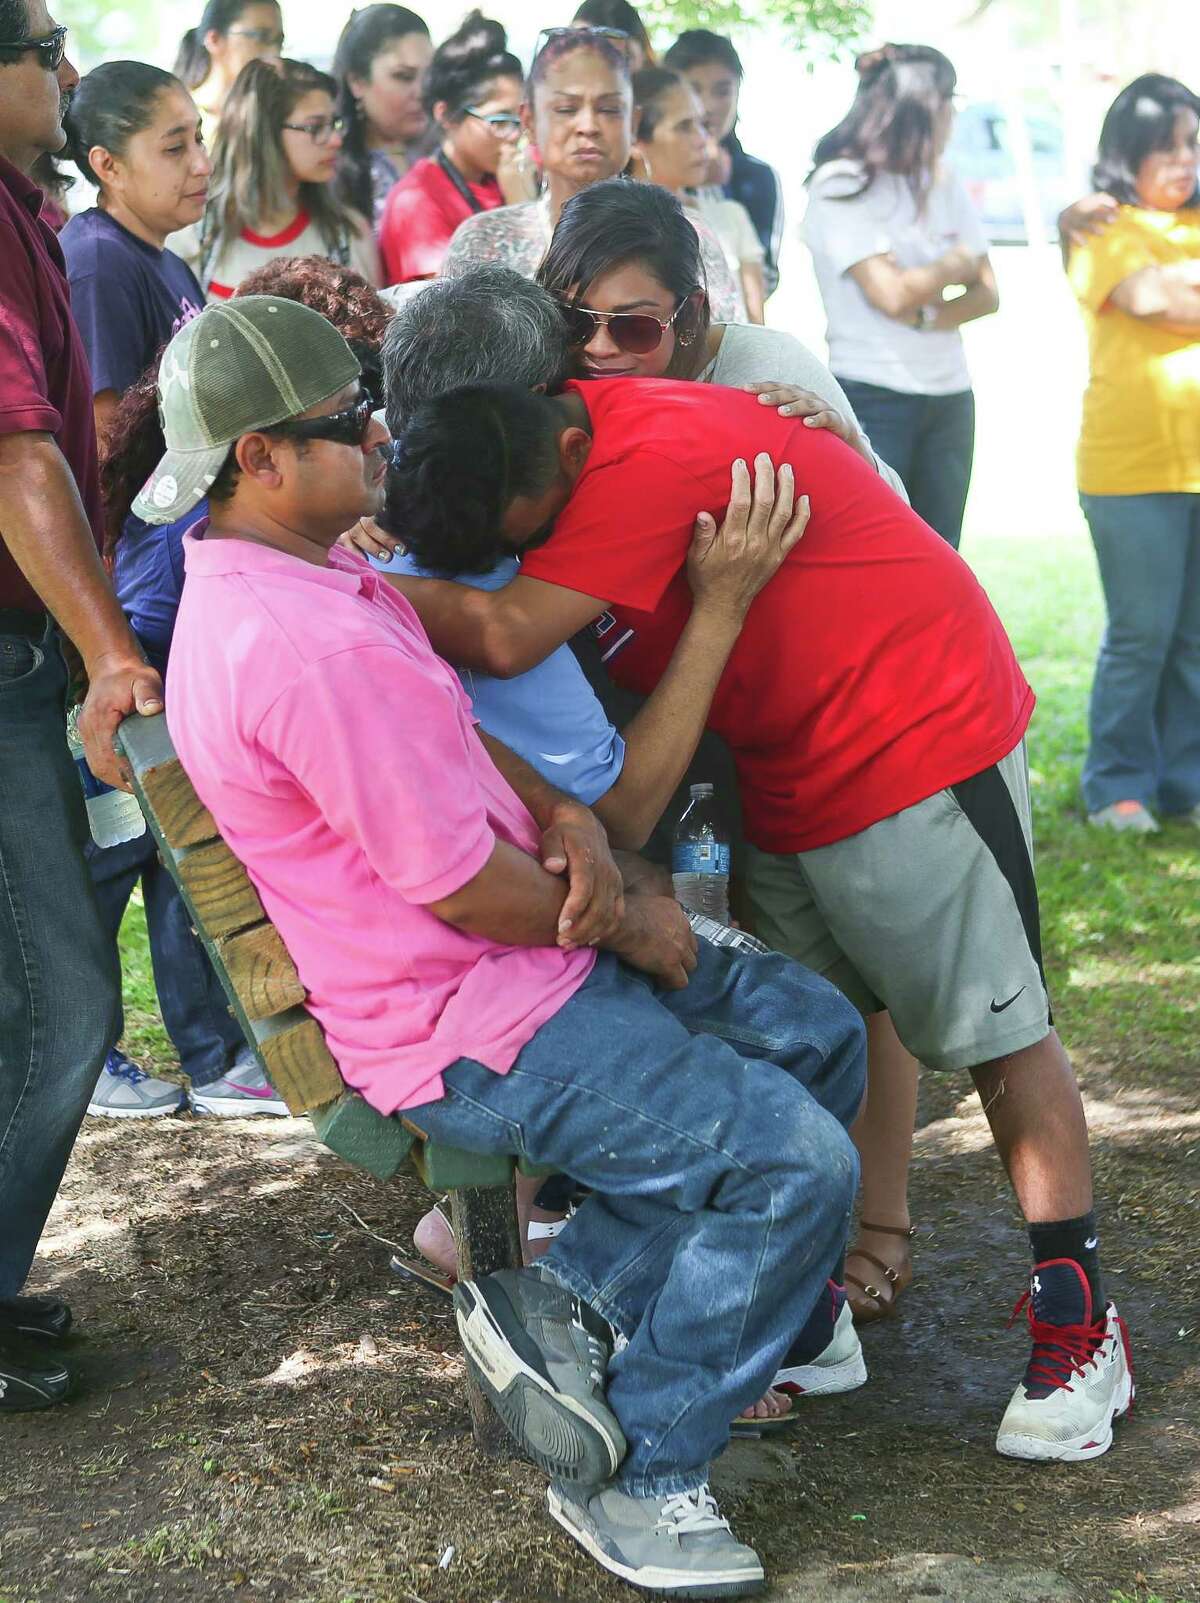 Family members mourn at a vigil at Peppermint Park where 13-year-old Juan Borja was shot and killed Wednesday night, during an afternoon gathering at the park, Thursday, April 20, 2017, in Freeport.